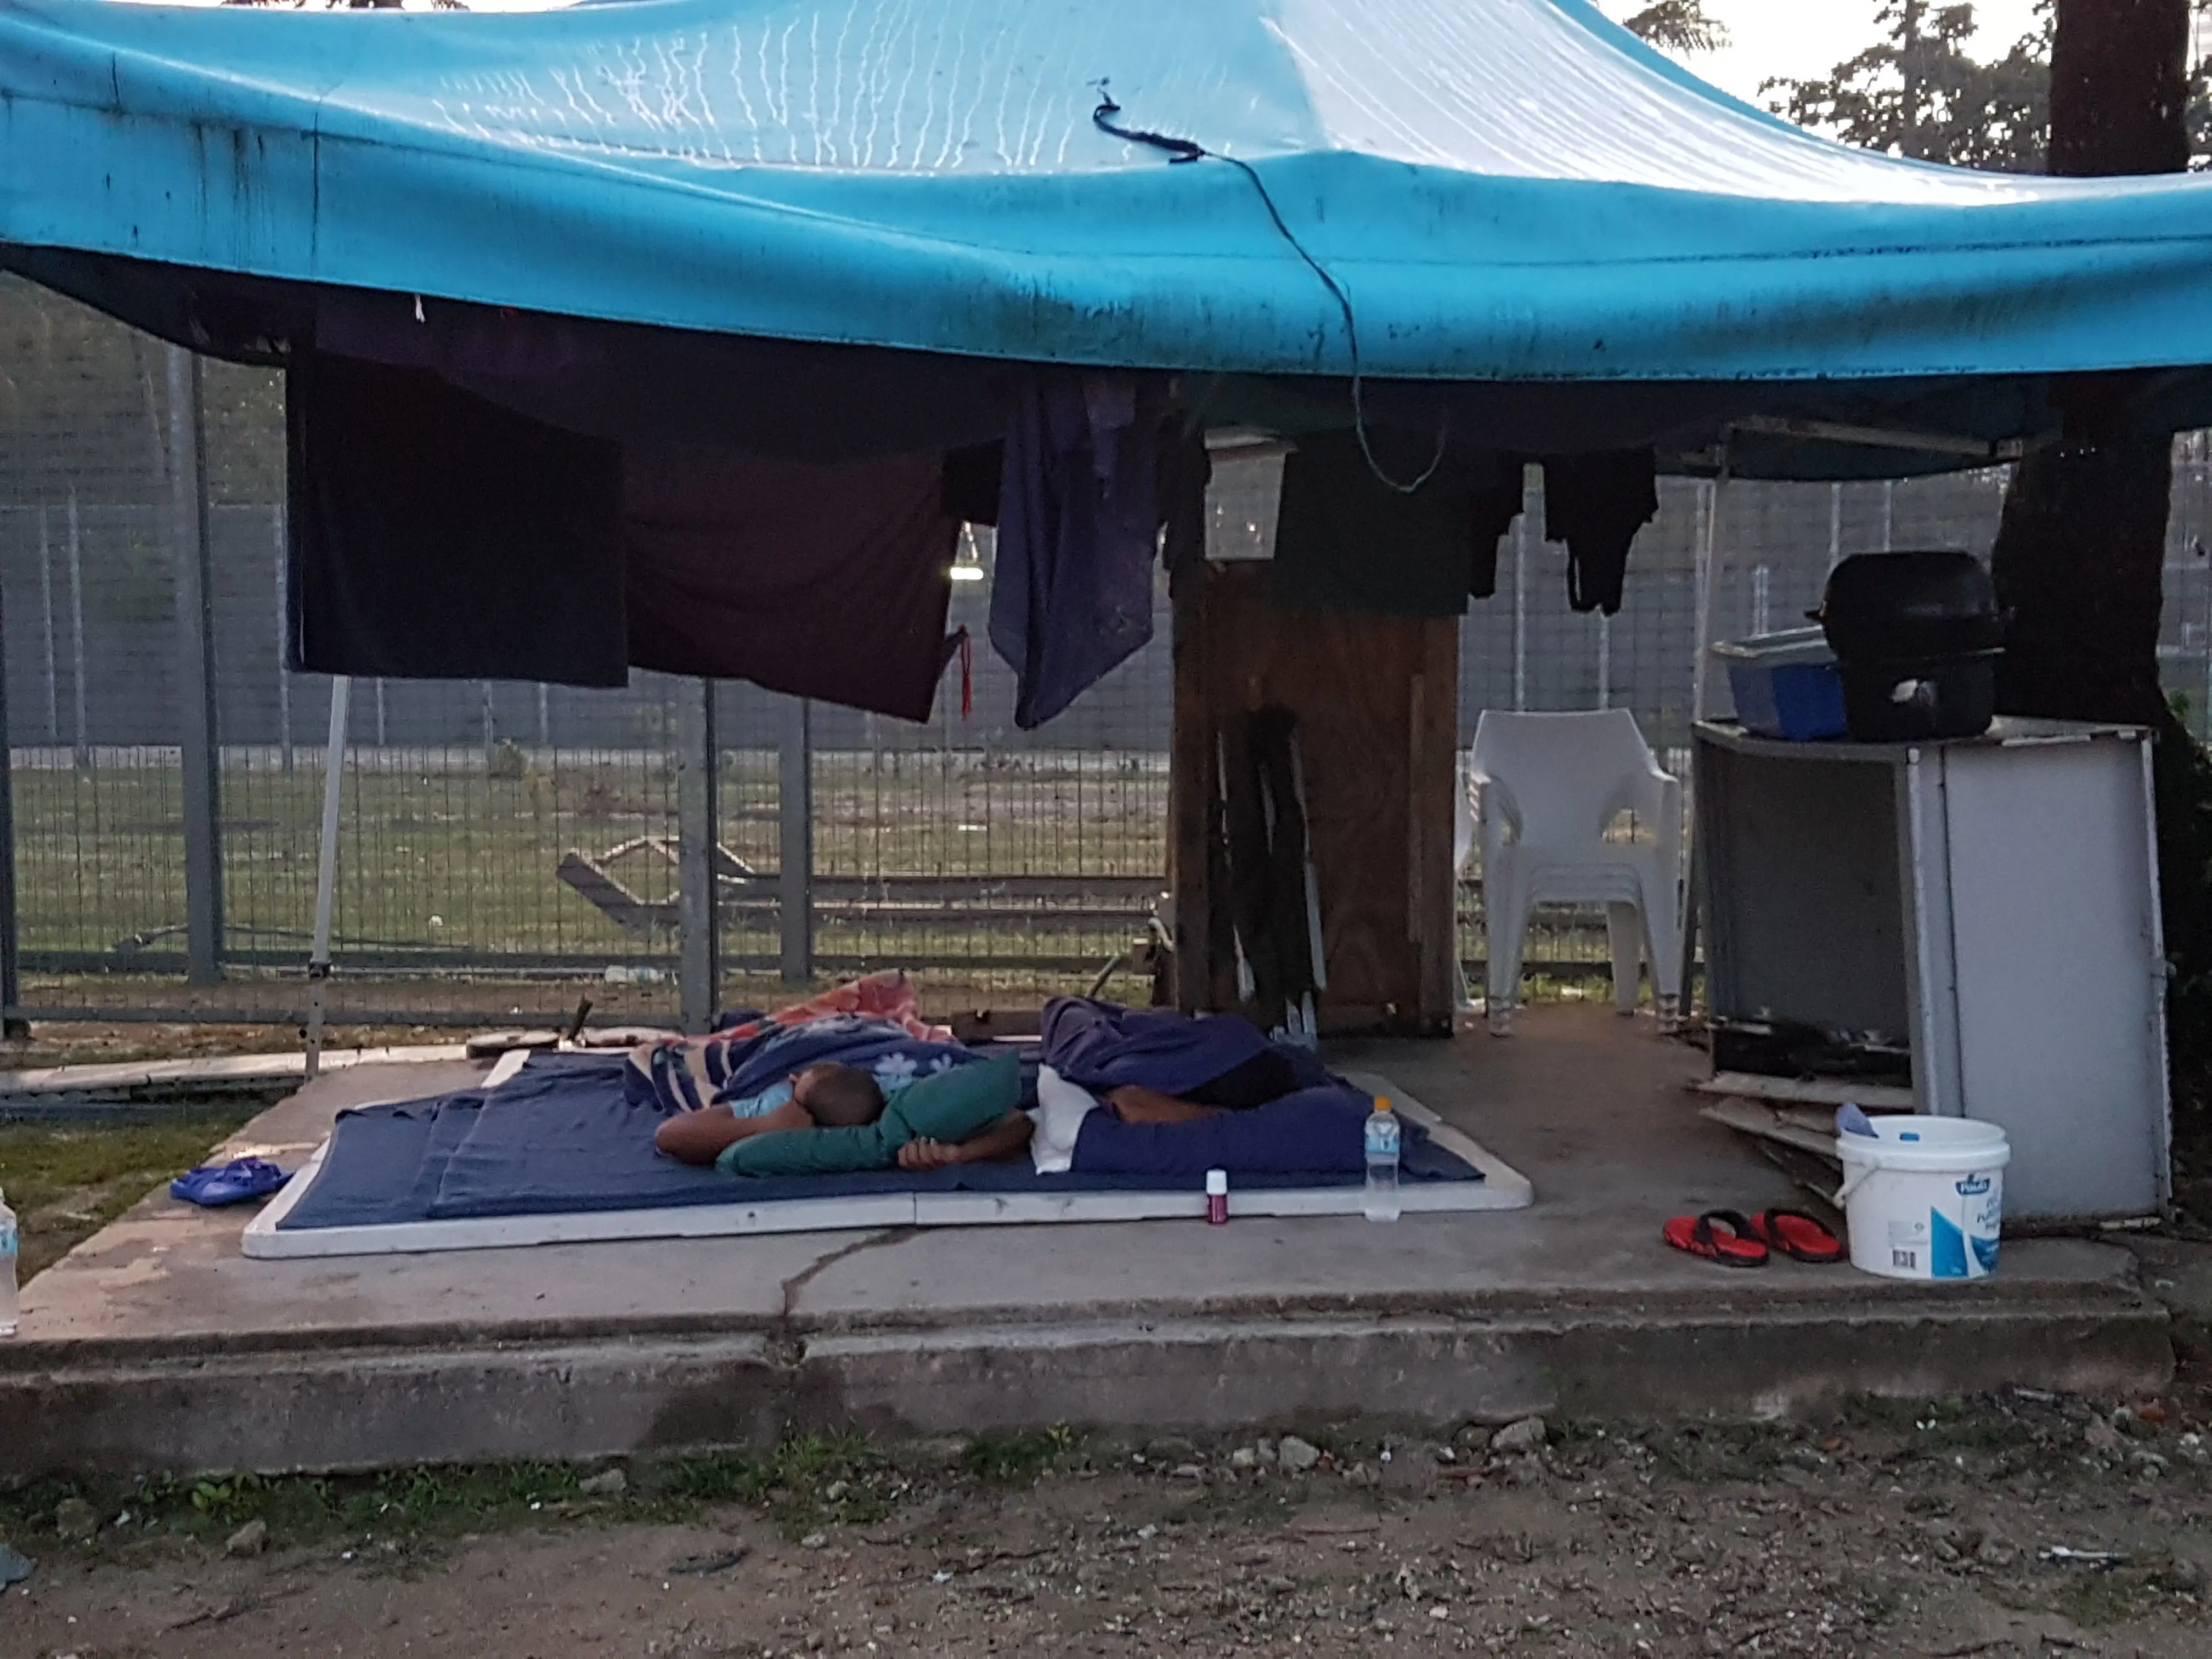 refugees sleep in the open beneath a tent